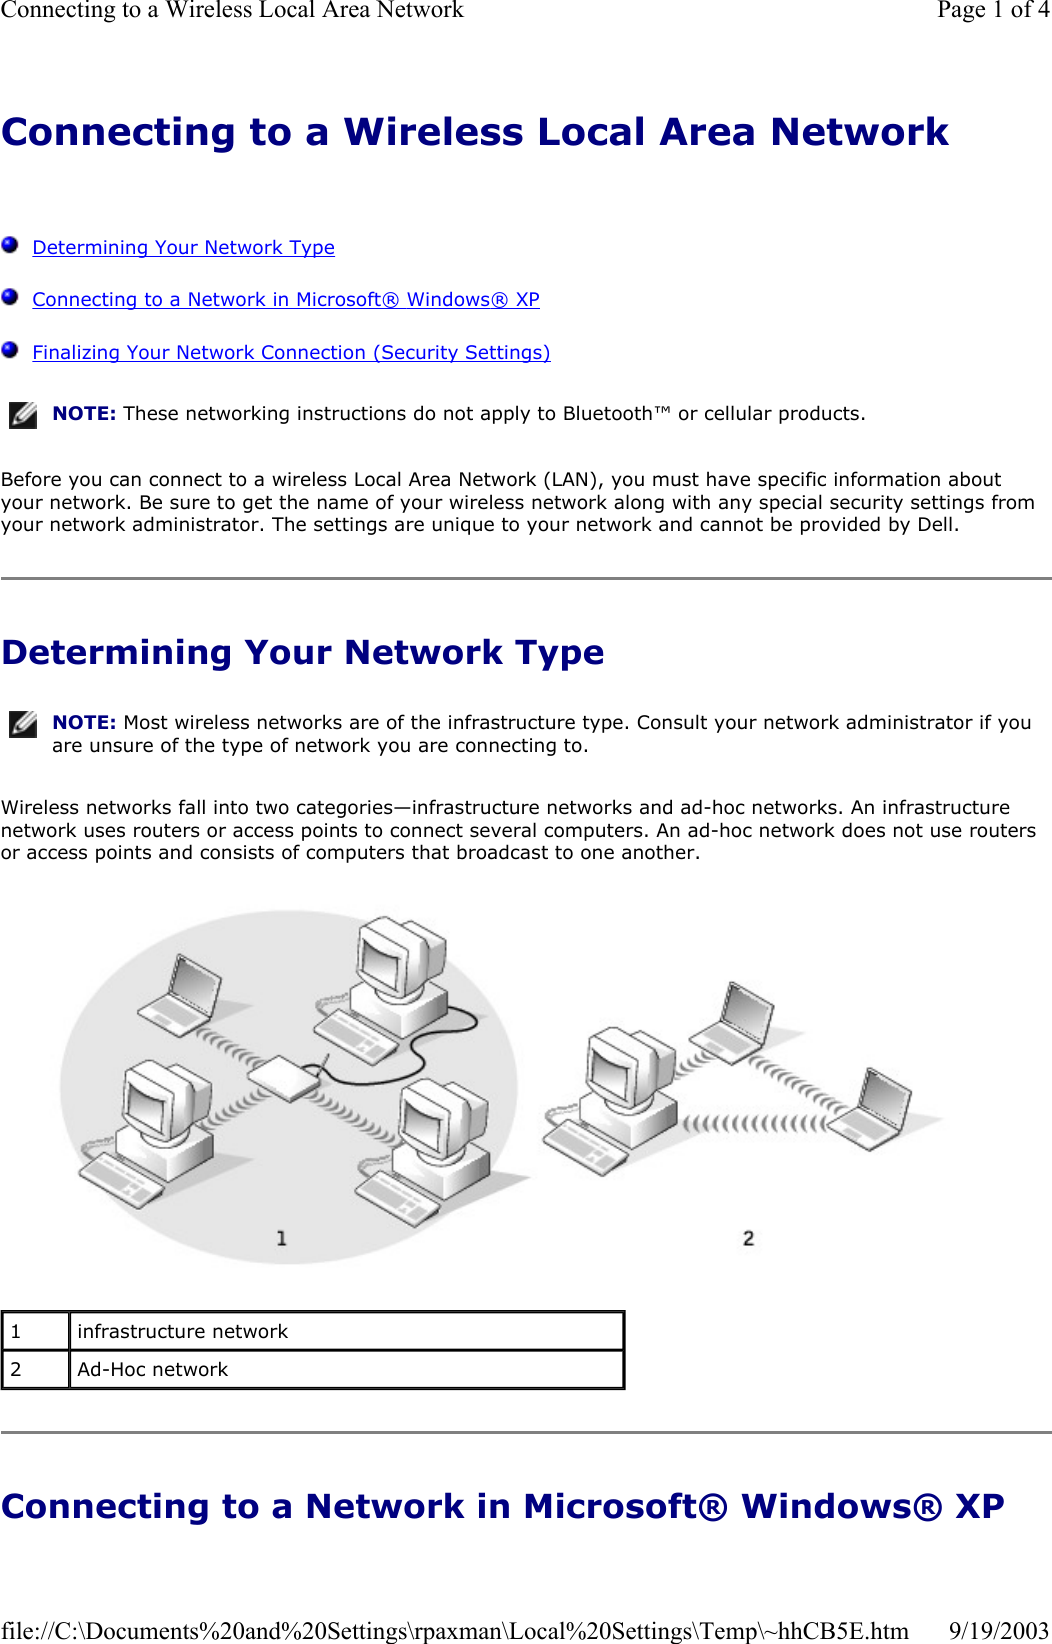 Connecting to a Wireless Local Area Network      Determining Your Network Type   Connecting to a Network in Microsoft® Windows® XP   Finalizing Your Network Connection (Security Settings) Before you can connect to a wireless Local Area Network (LAN), you must have specific information about your network. Be sure to get the name of your wireless network along with any special security settings from your network administrator. The settings are unique to your network and cannot be provided by Dell.  Determining Your Network Type Wireless networks fall into two categories—infrastructure networks and ad-hoc networks. An infrastructure network uses routers or access points to connect several computers. An ad-hoc network does not use routers or access points and consists of computers that broadcast to one another.   Connecting to a Network in Microsoft® Windows® XP NOTE: These networking instructions do not apply to Bluetooth™ or cellular products.NOTE: Most wireless networks are of the infrastructure type. Consult your network administrator if you are unsure of the type of network you are connecting to.1  infrastructure network 2  Ad-Hoc network Page 1 of 4Connecting to a Wireless Local Area Network9/19/2003file://C:\Documents%20and%20Settings\rpaxman\Local%20Settings\Temp\~hhCB5E.htm